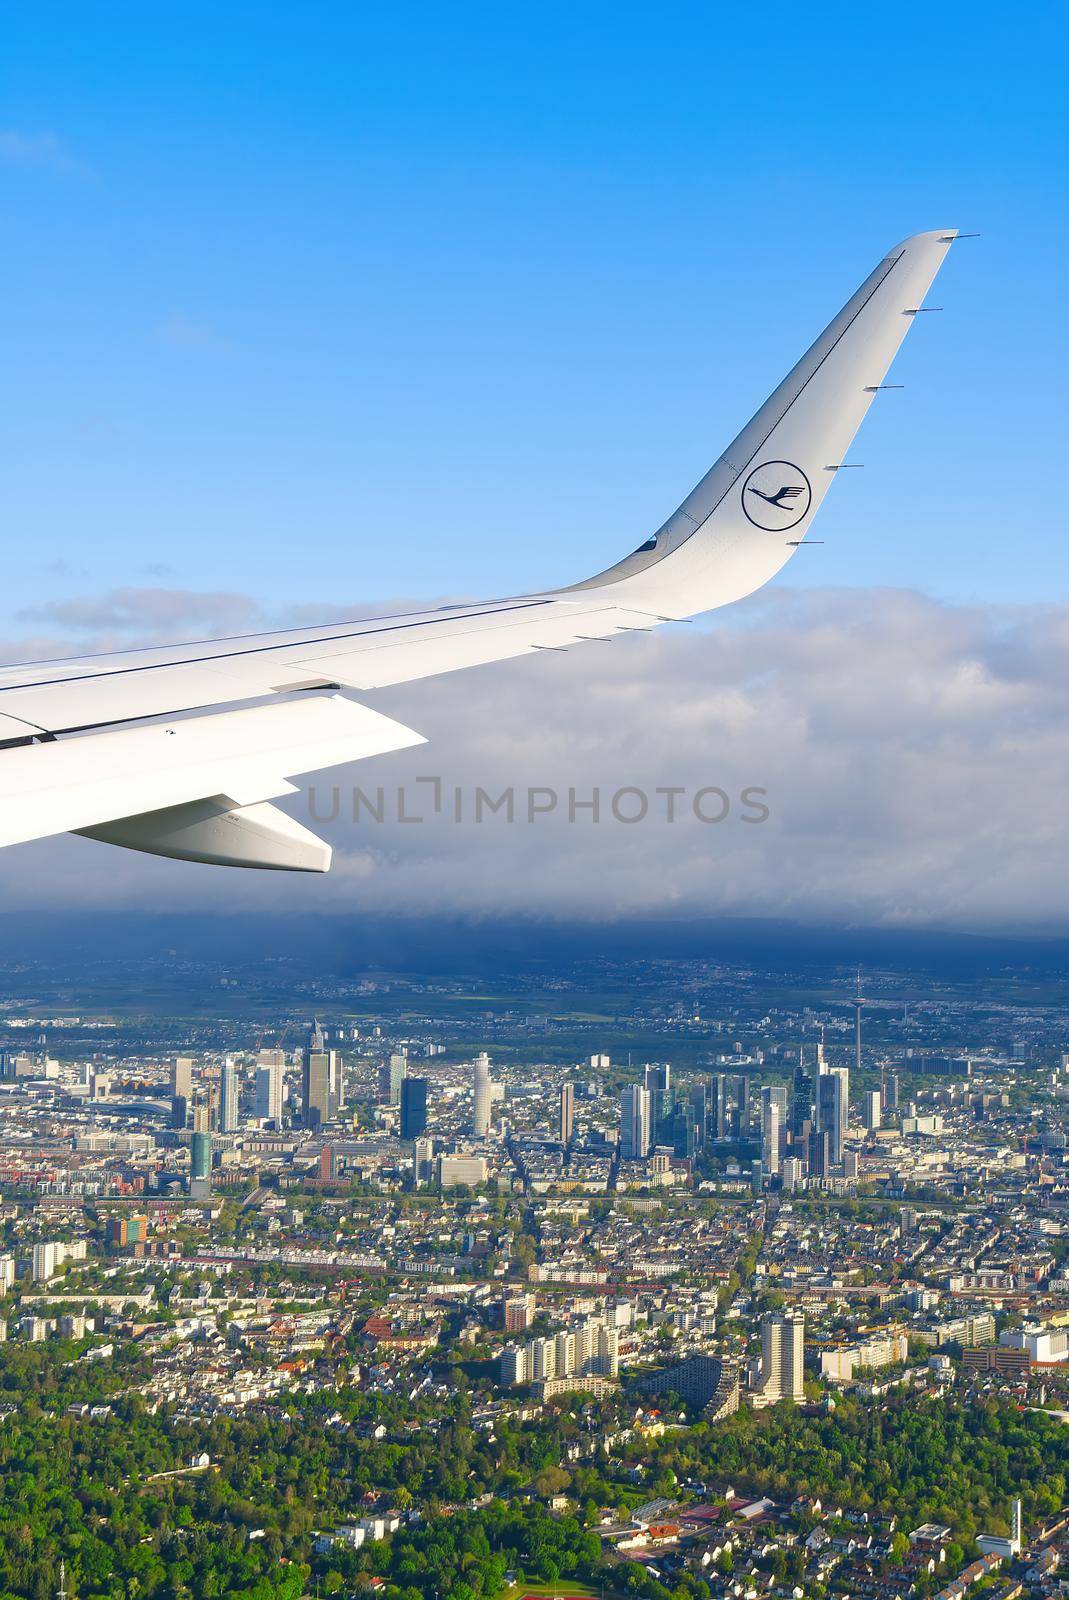 22.05.2021 Frankfurt, Germany: The Airbus A321 wing with Lufthansa airline logo and blue sky over clouds background. by PhotoTime